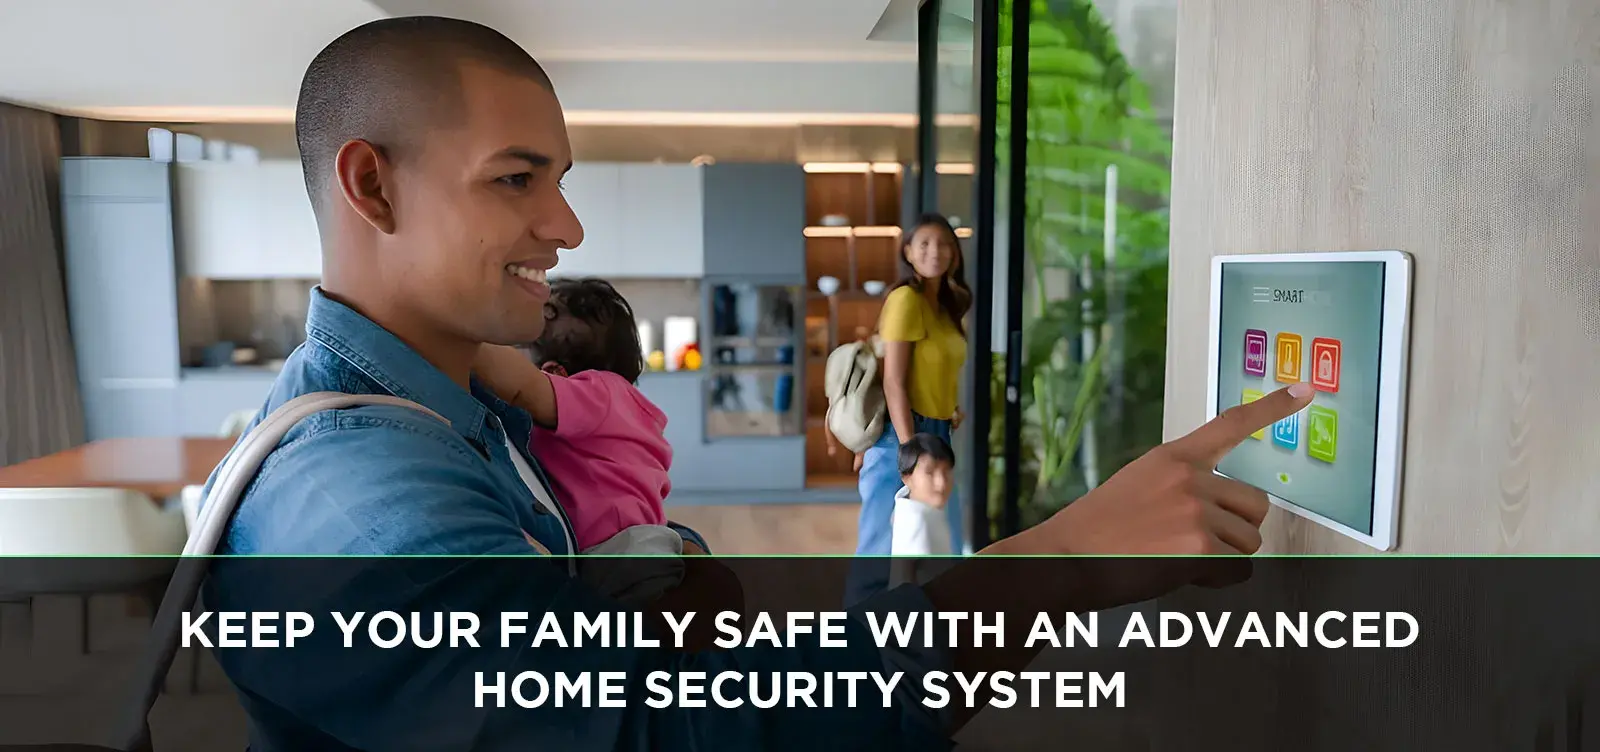 keep your family safe and secure? Are you looking for the most advanced home security system